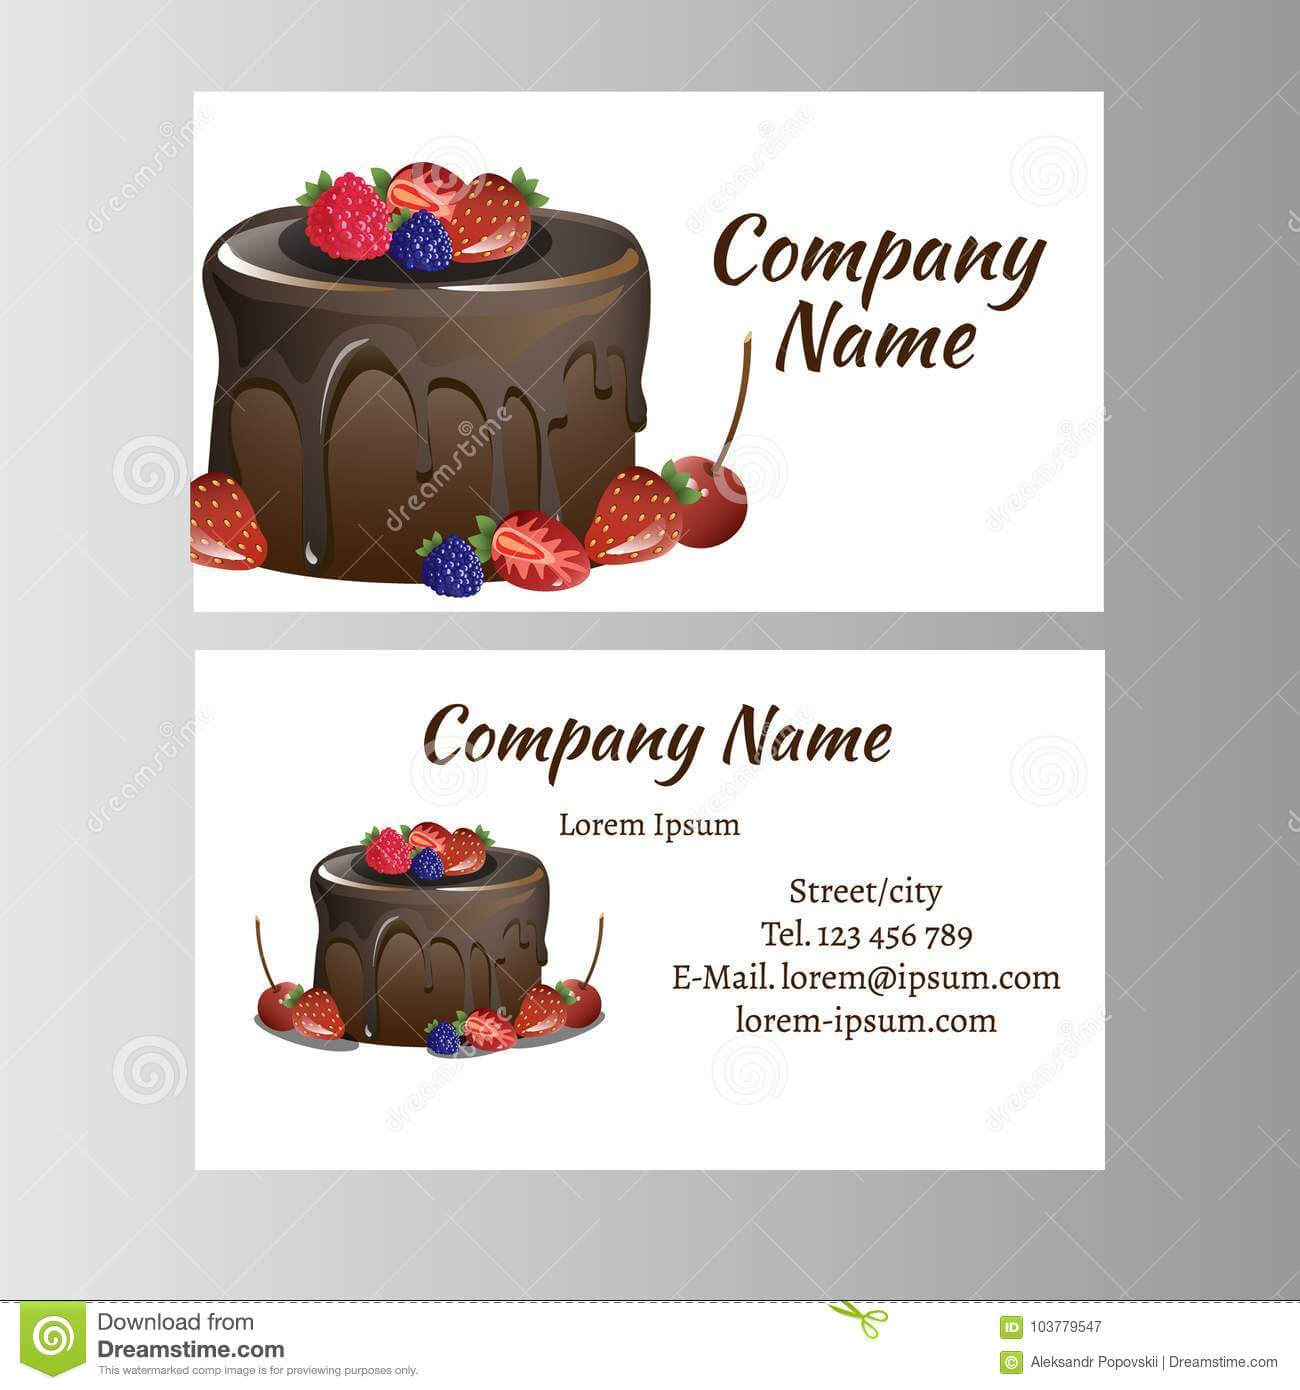 Business Card Template For Bakery Business. Stock Vector With Regard To Cake Business Cards Templates Free